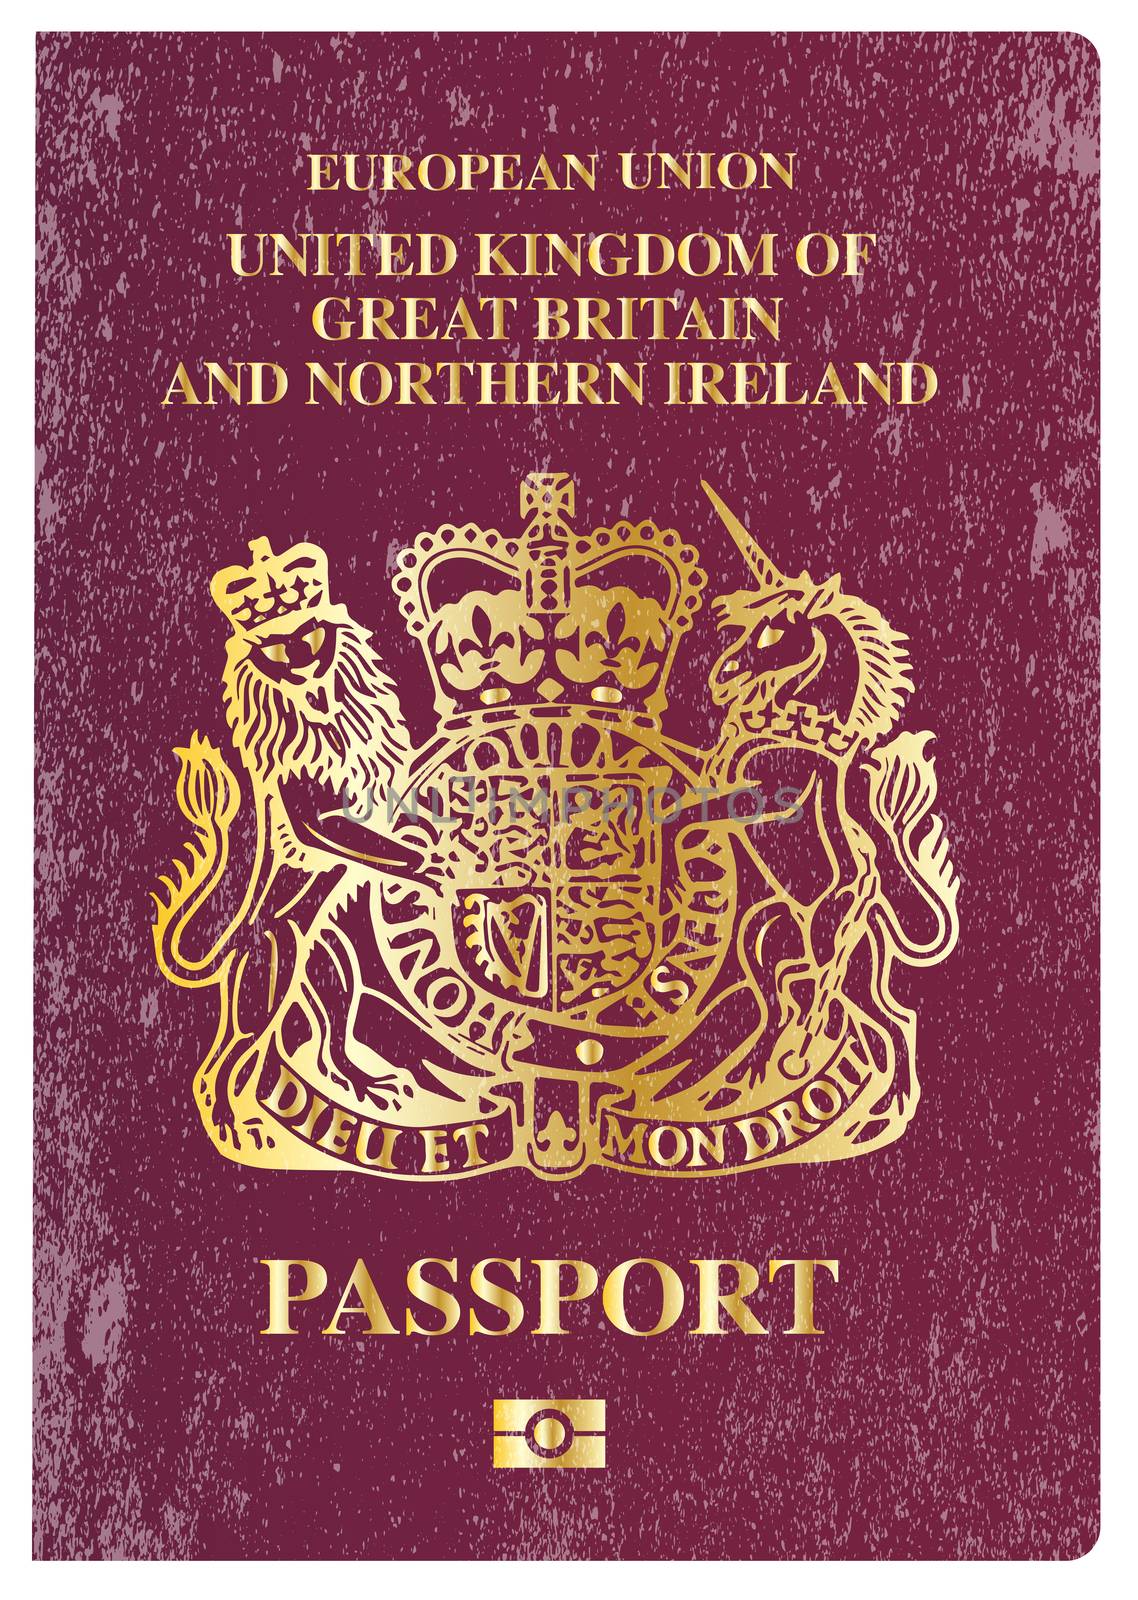 The front cover of a worn British passport